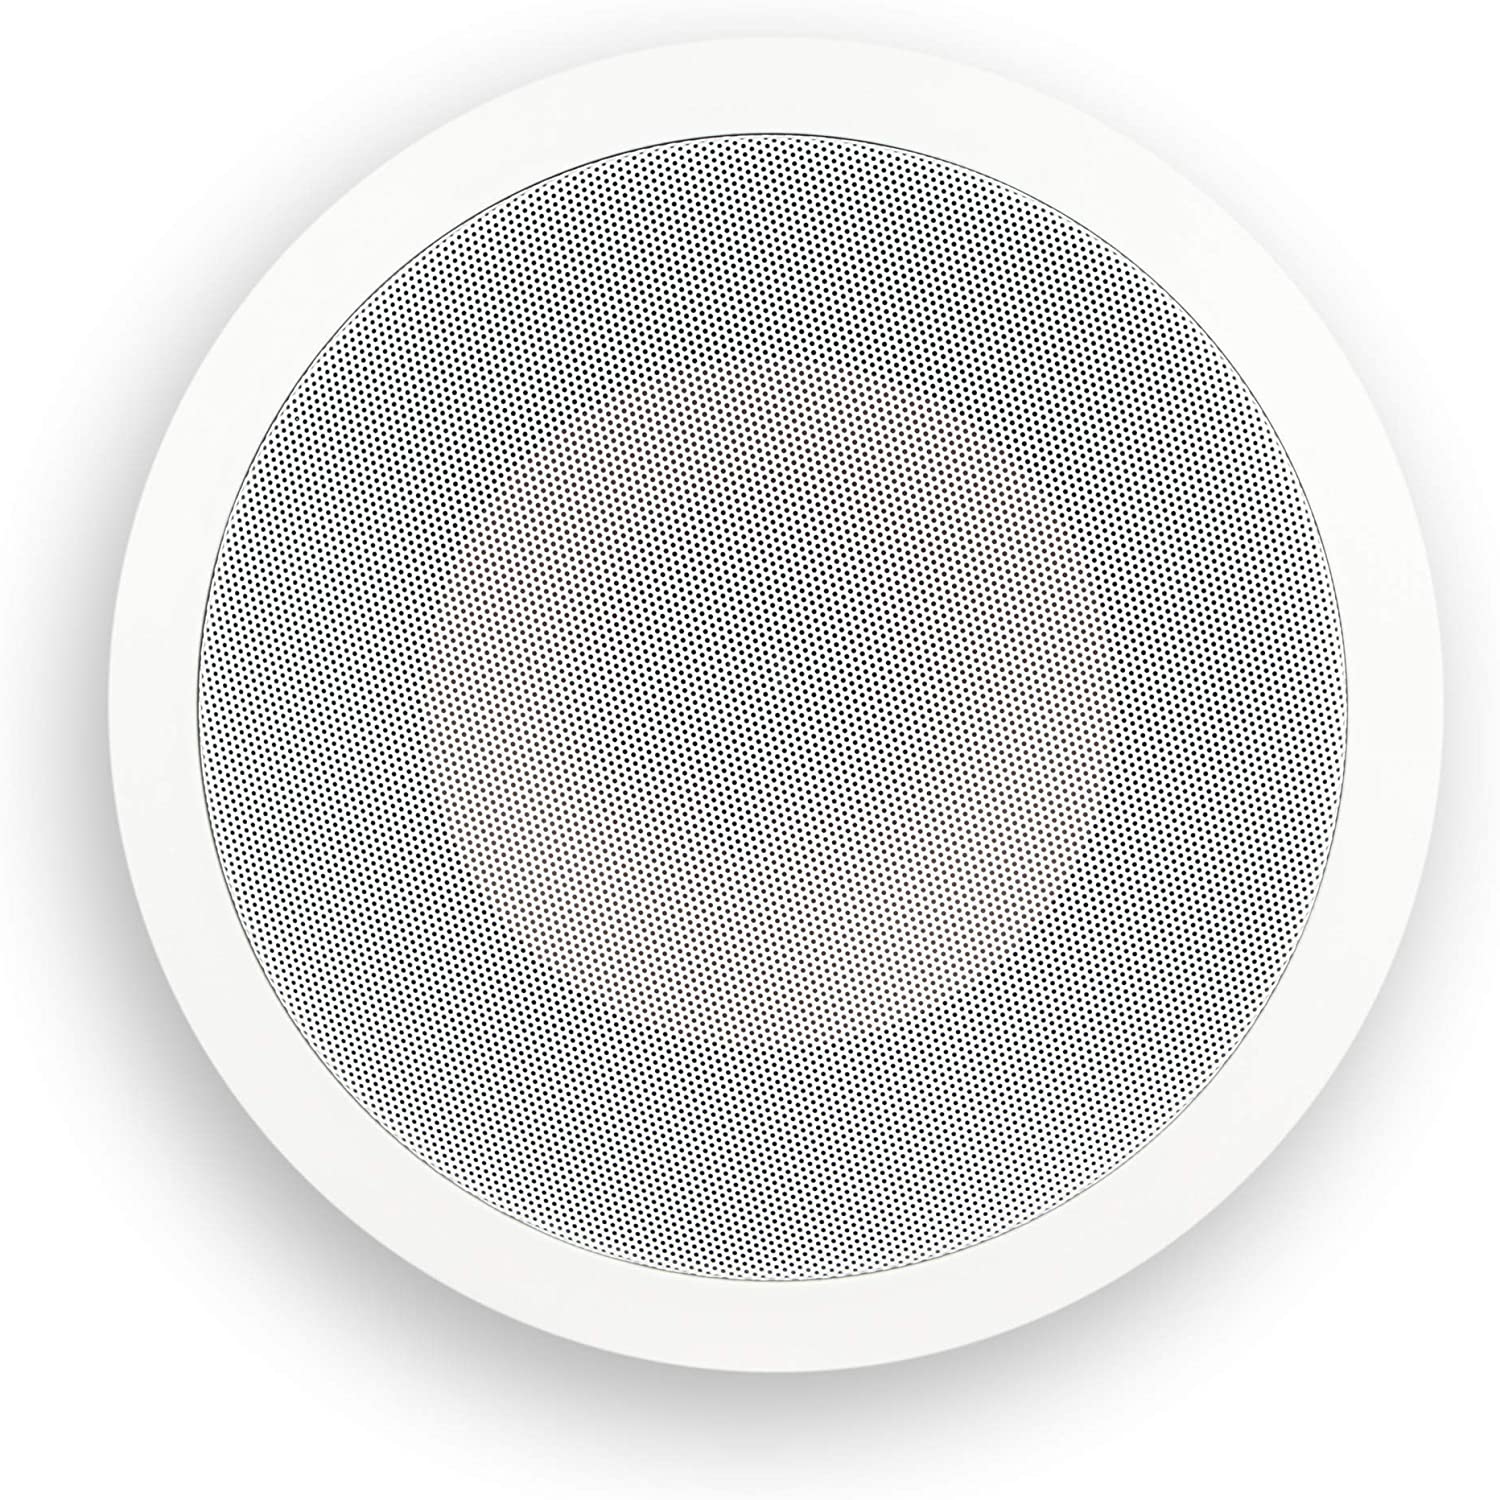 Micca M-8C 8 Inch 2-Way in-Ceiling Round Speaker for Whole House Audio, Home Theater, Indoor or Covered Outdoor Areas, 8" Woofer, 1" Silk Tweeter, 9.4" Cutout Diameter, White, Paintable, Each 8-Inch In-Ceiling - image 3 of 6